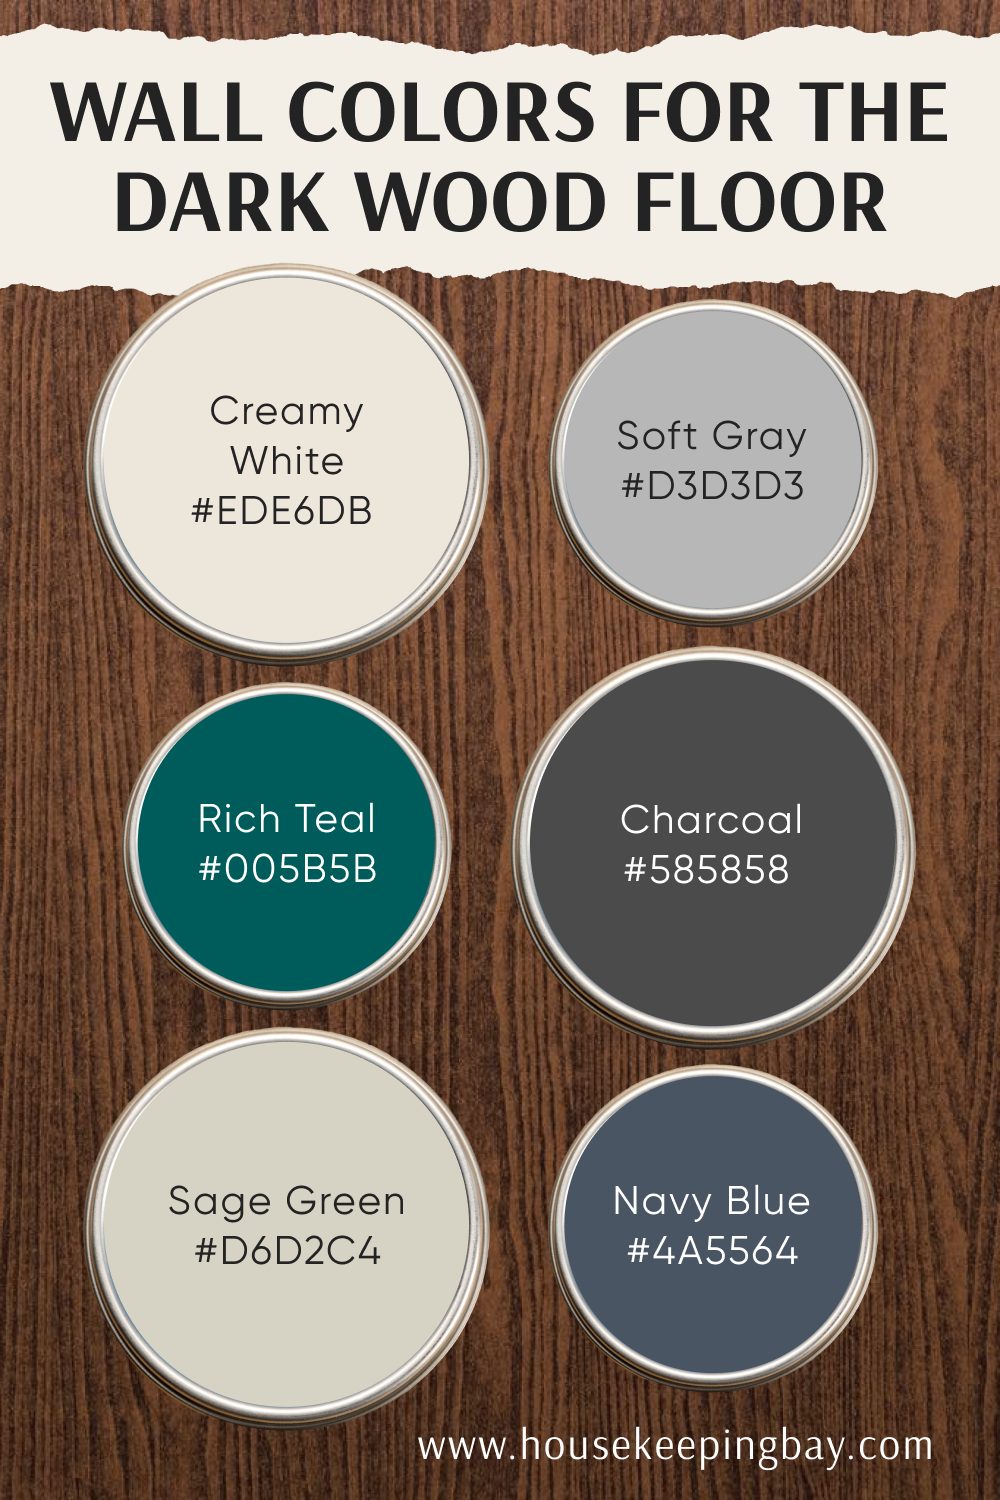 Wall Colors for the Dark Wood Floor